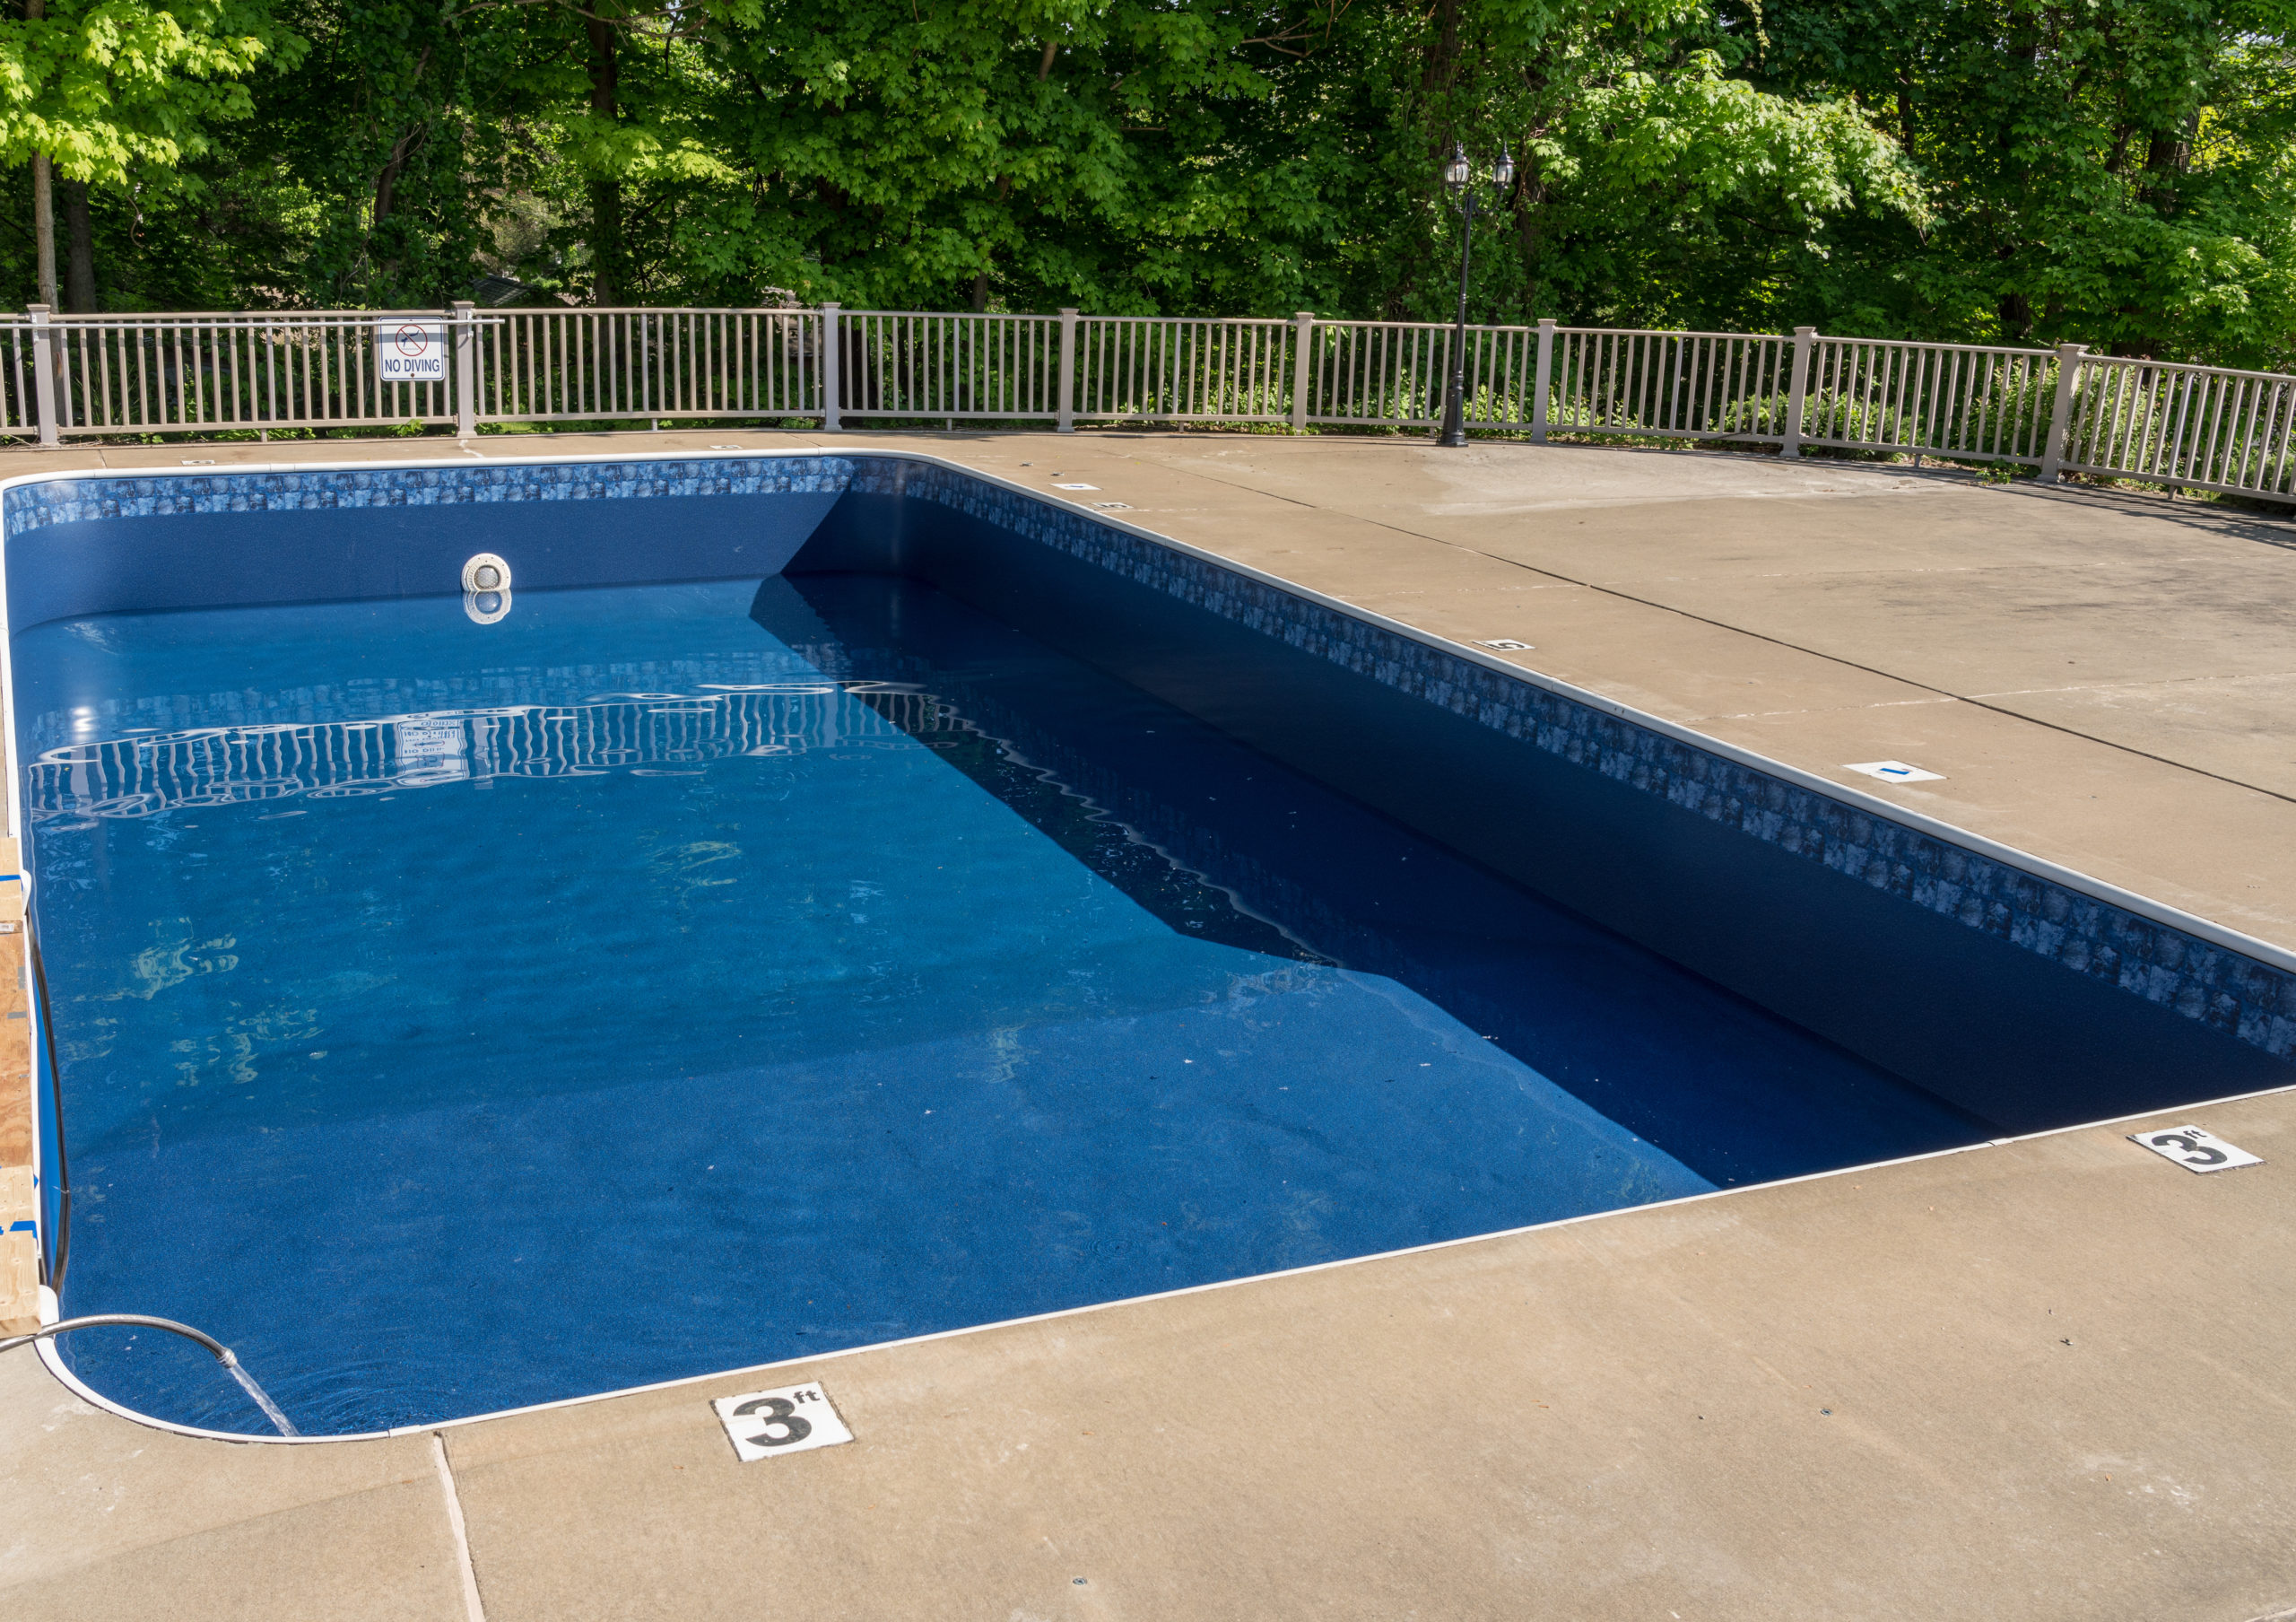 The vinyl surface of a pool, known for its durability and smooth texture.